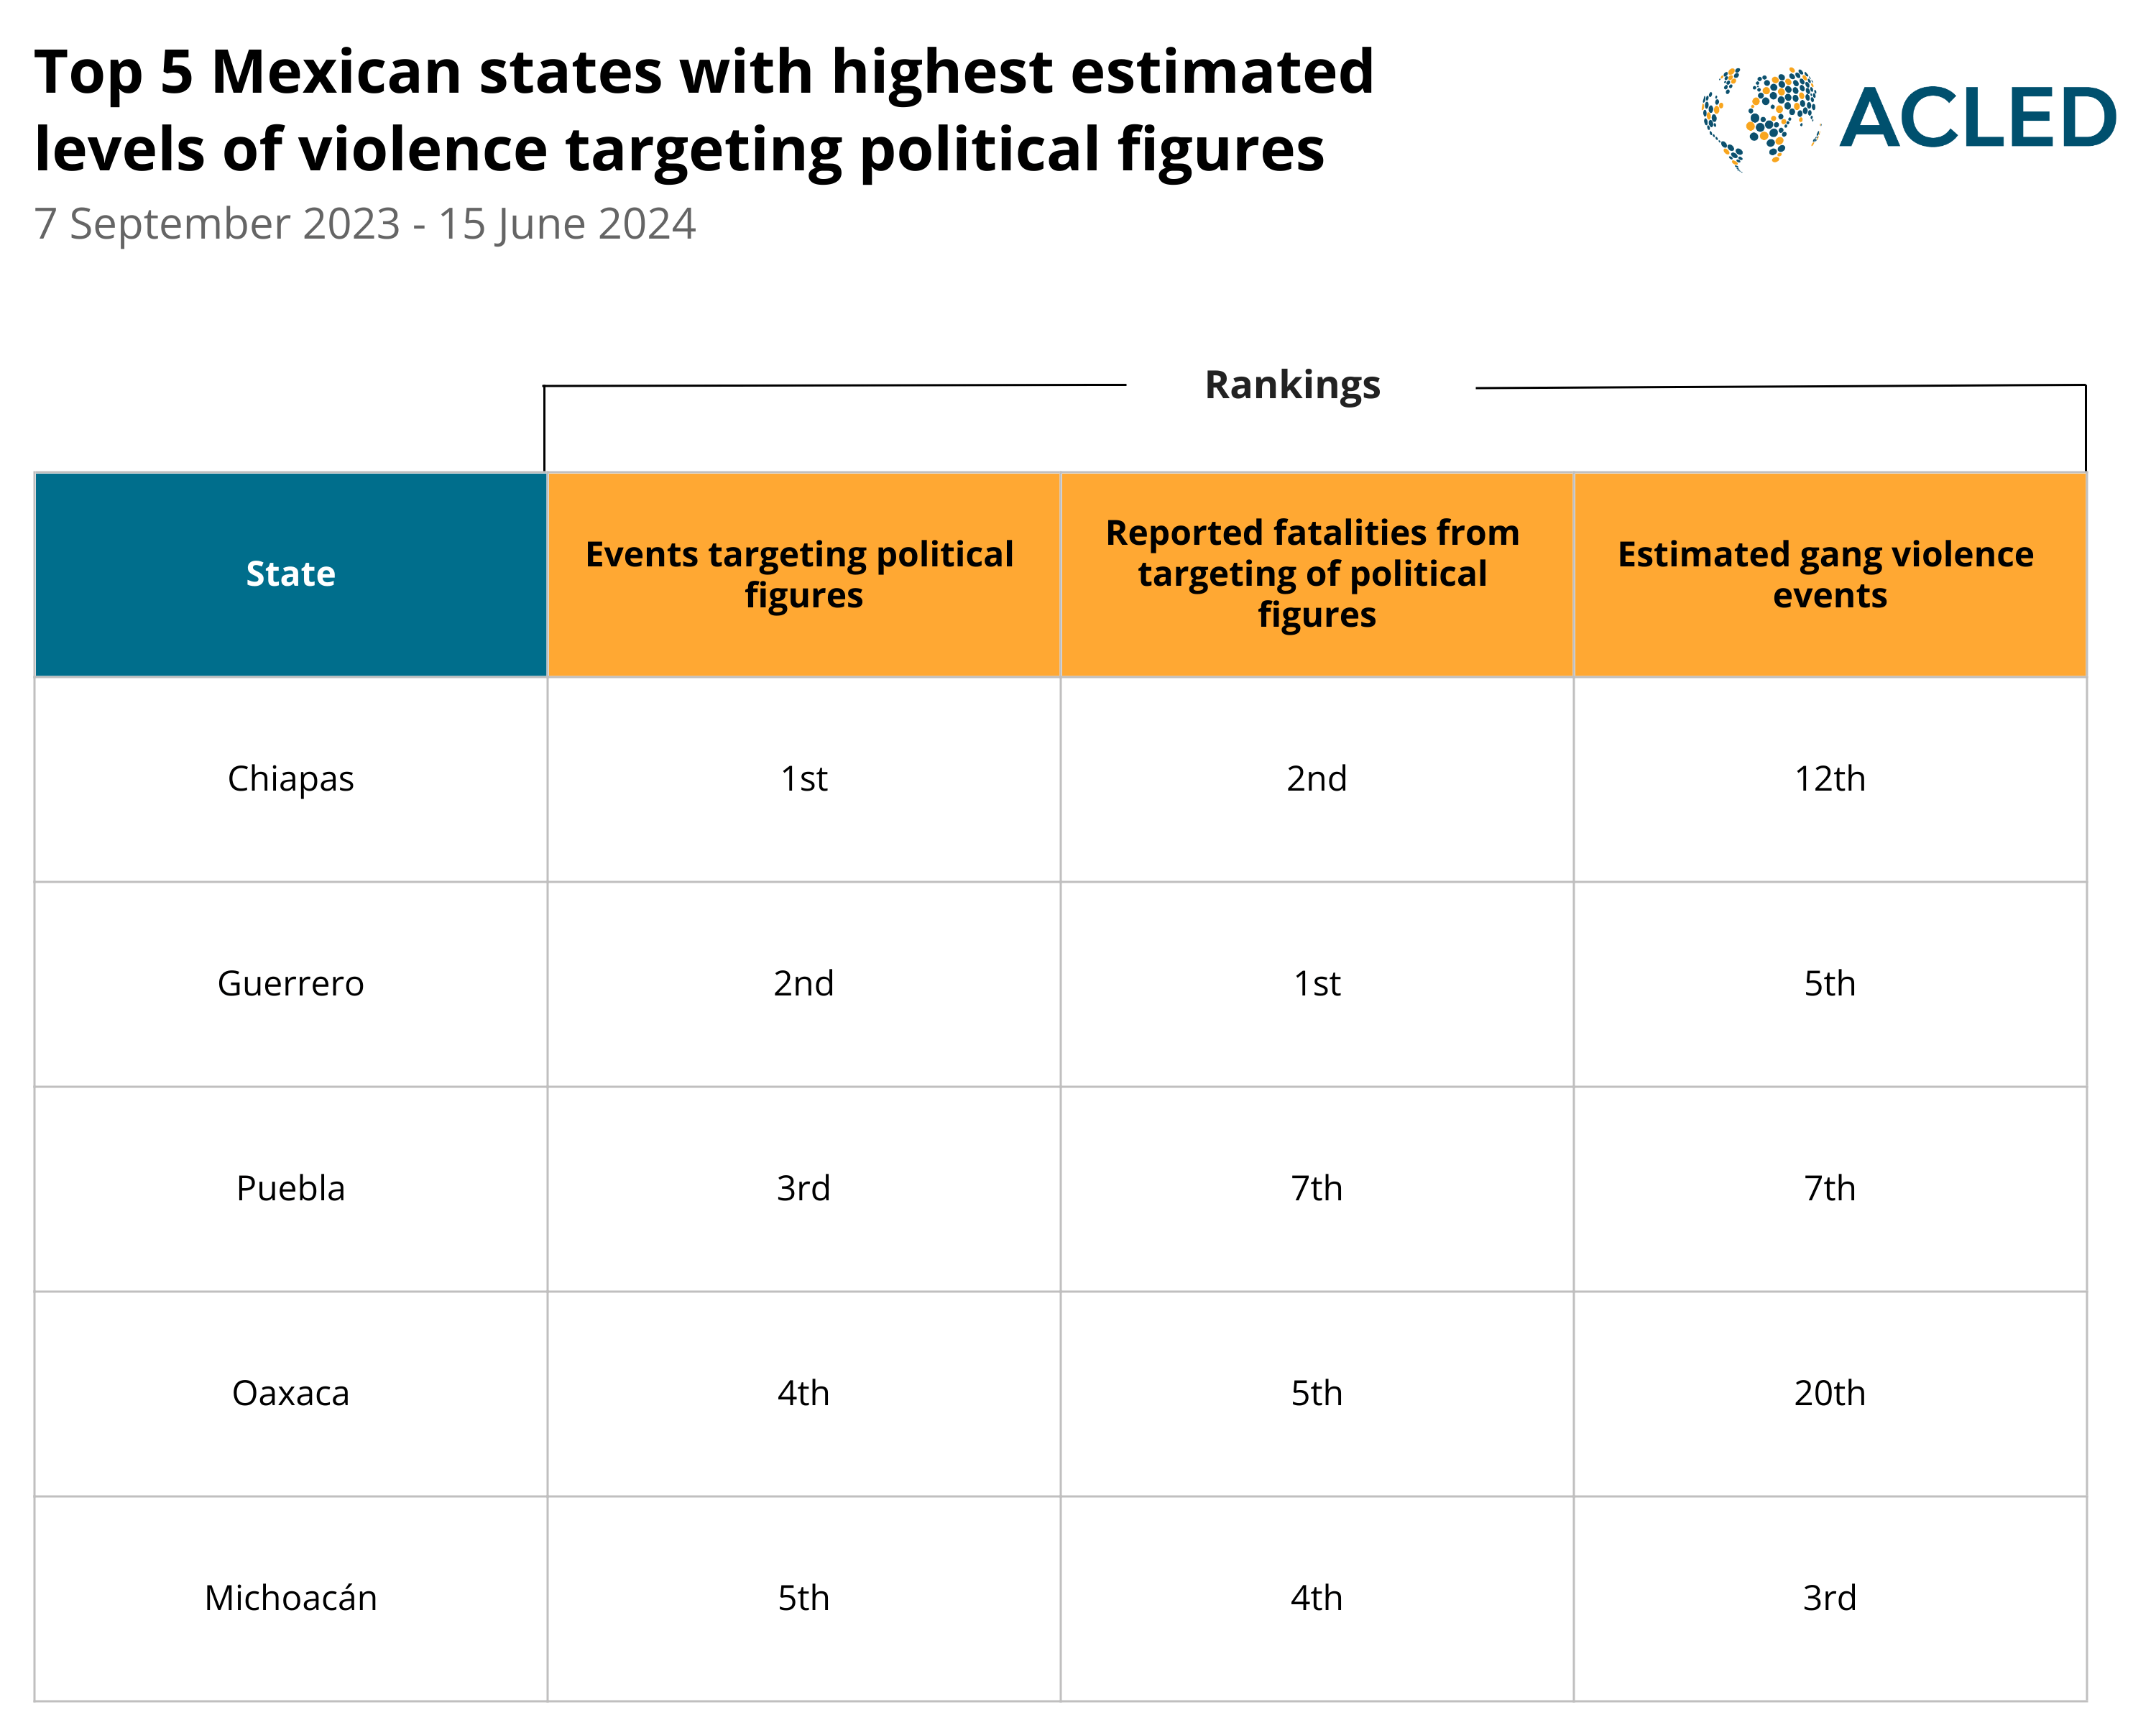 Table - Top 5 Mexican states with highest estimated levels of violence targeting political figures - 7 Sept 2023 - 15 June 2024